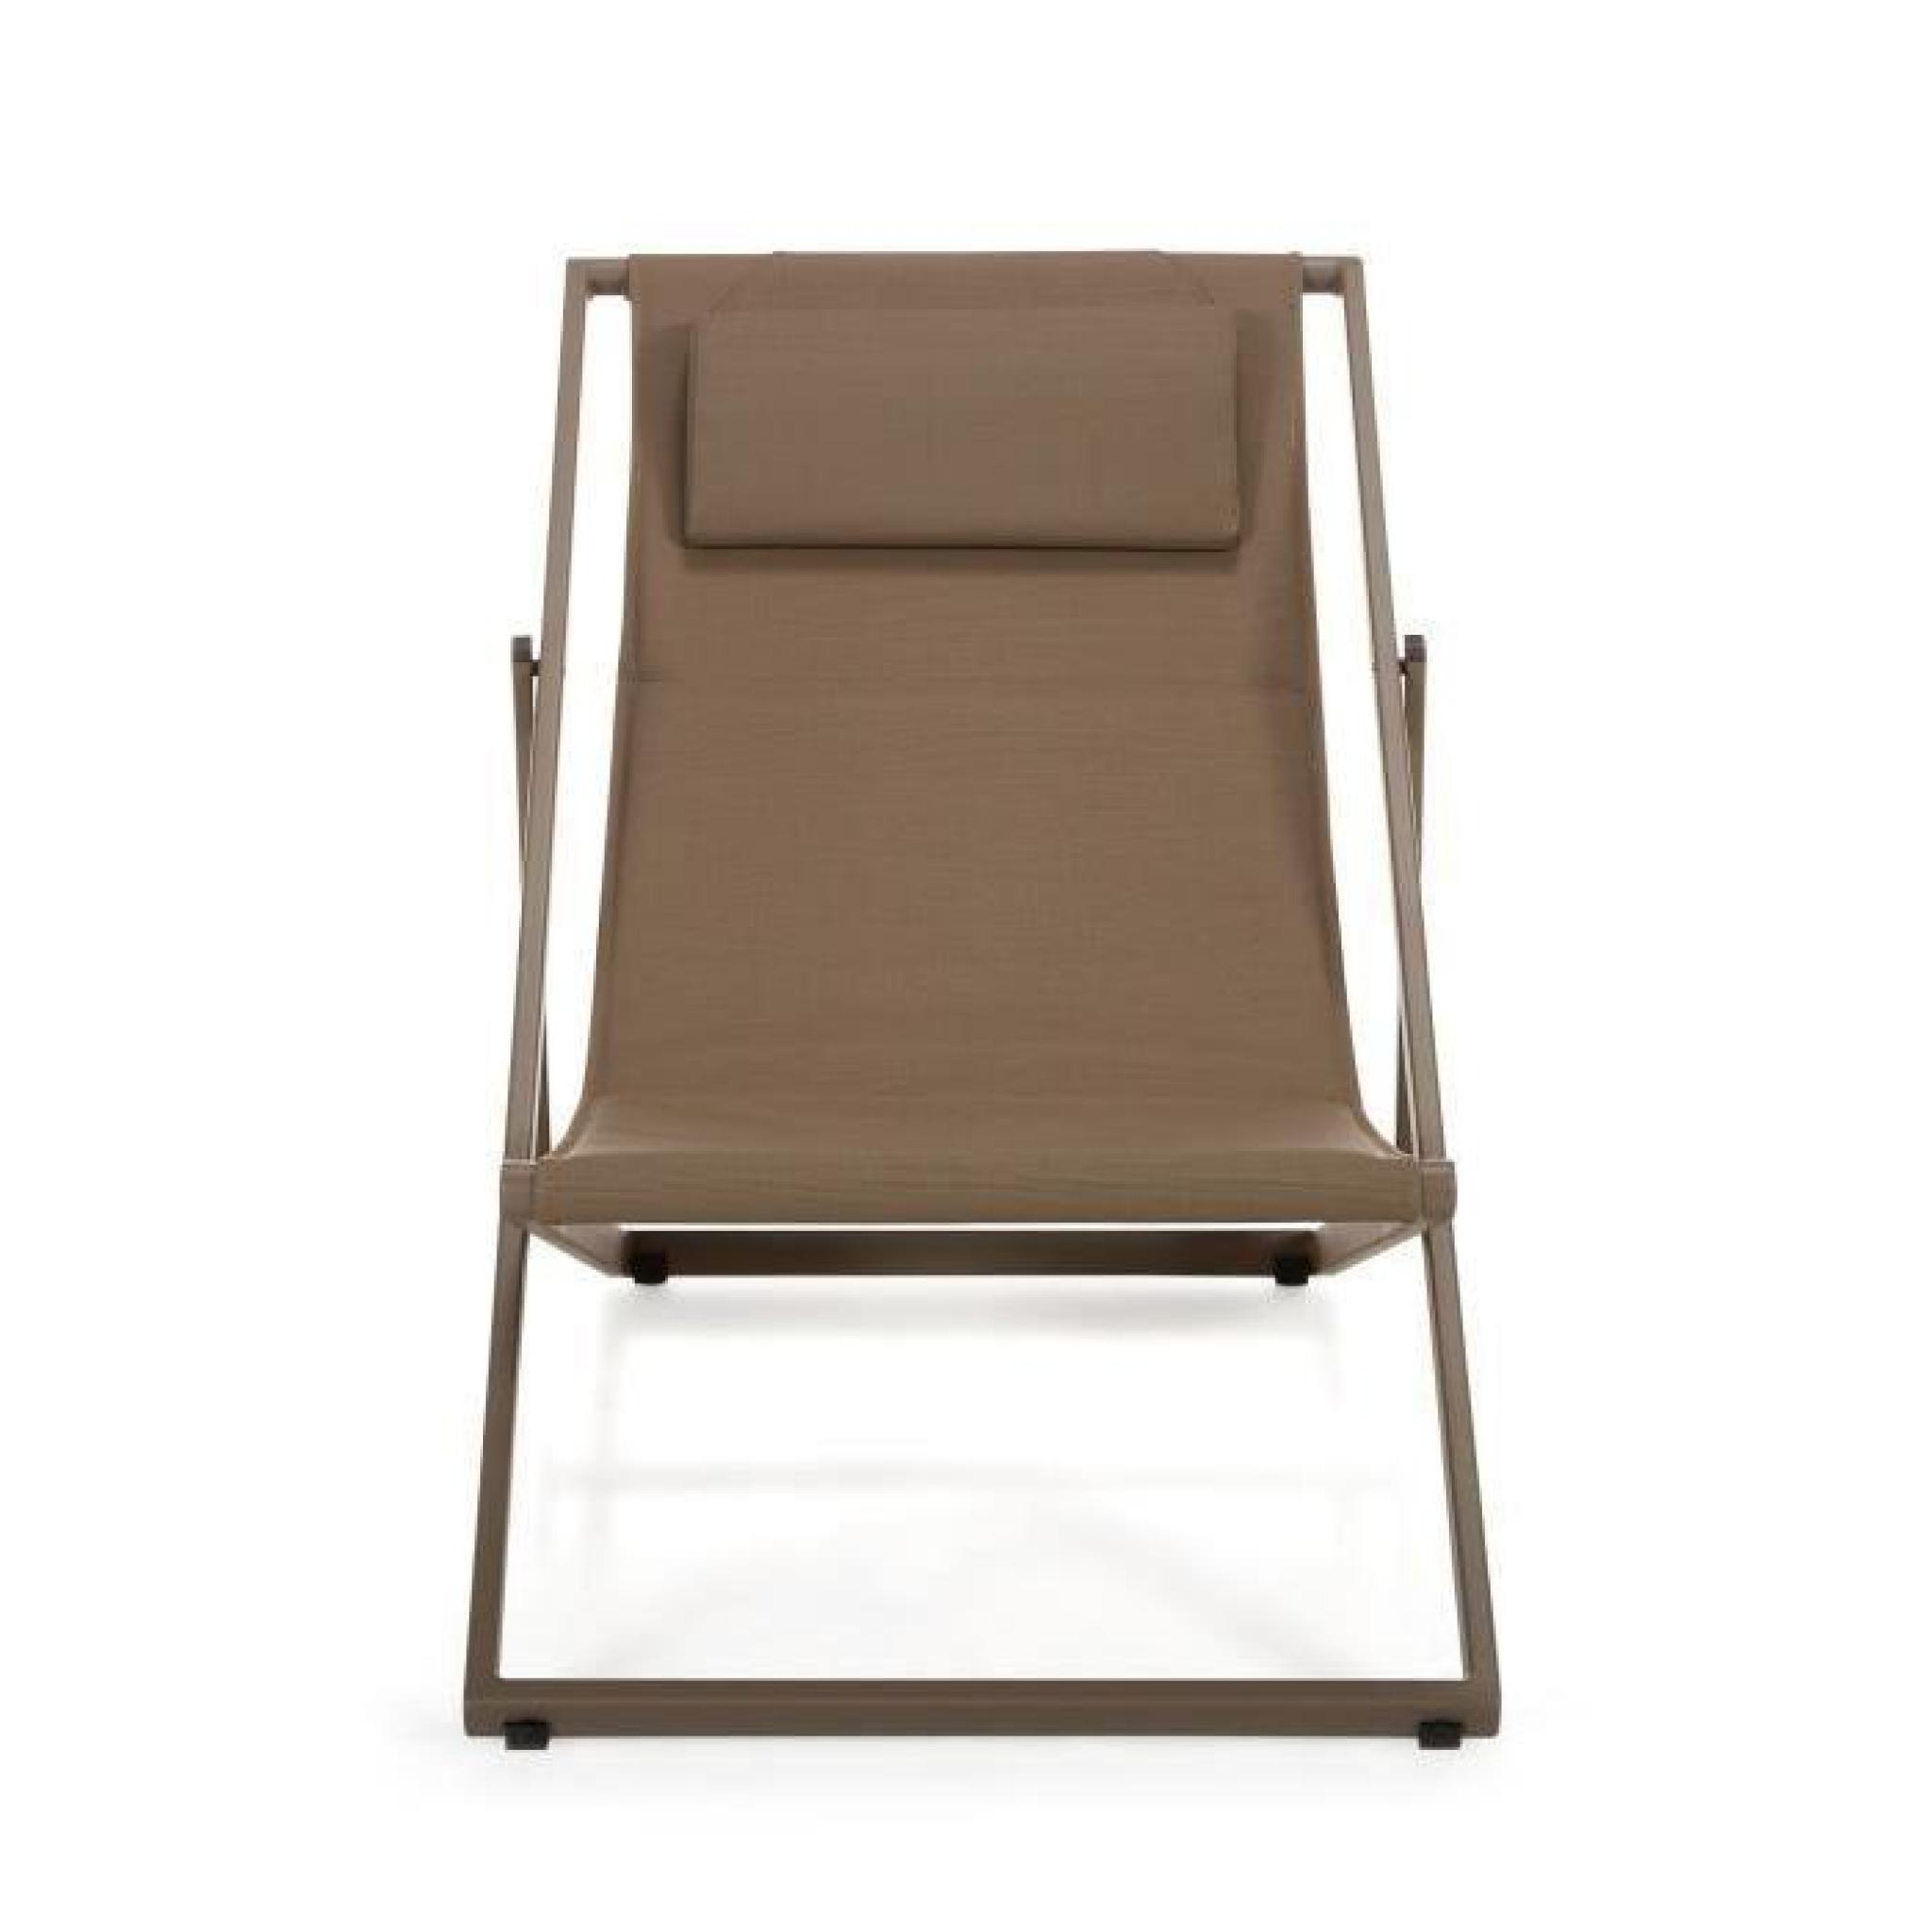 Sienne Chilienne pliable 5 positions coloris taupe